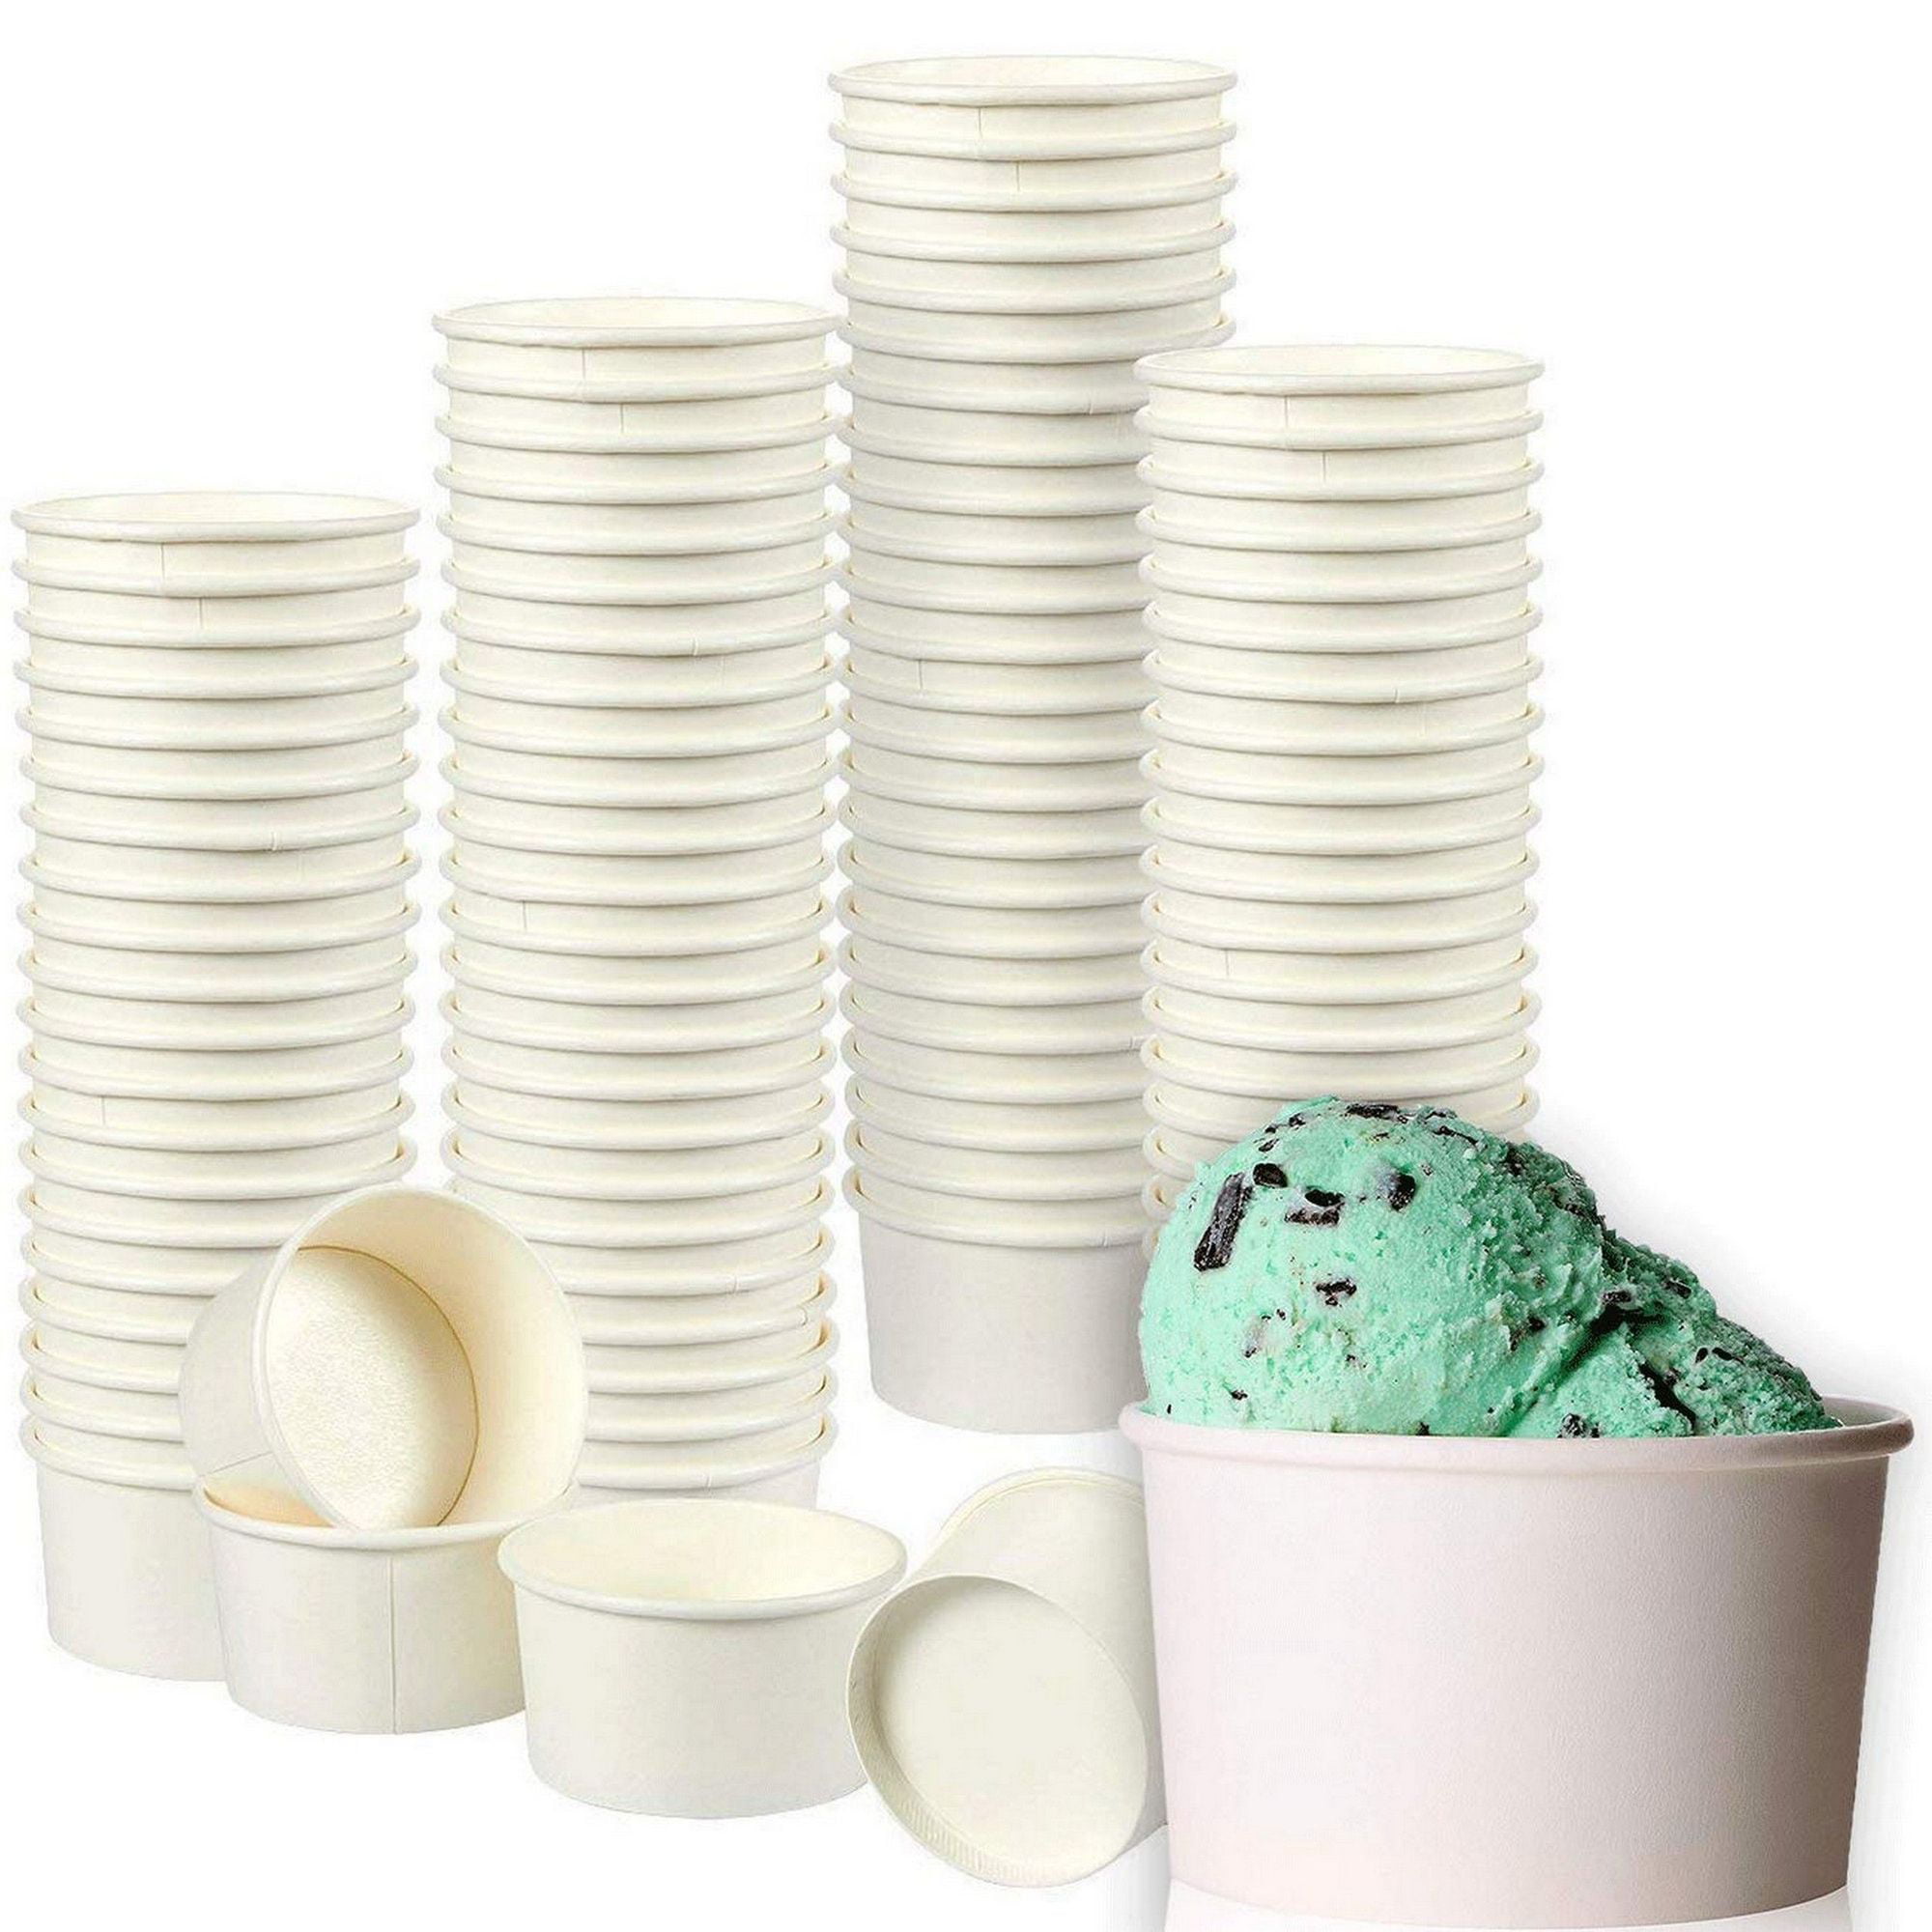 200 Pcs Disposable Ice Cream Cups, 8 oz. Paper Bowls for